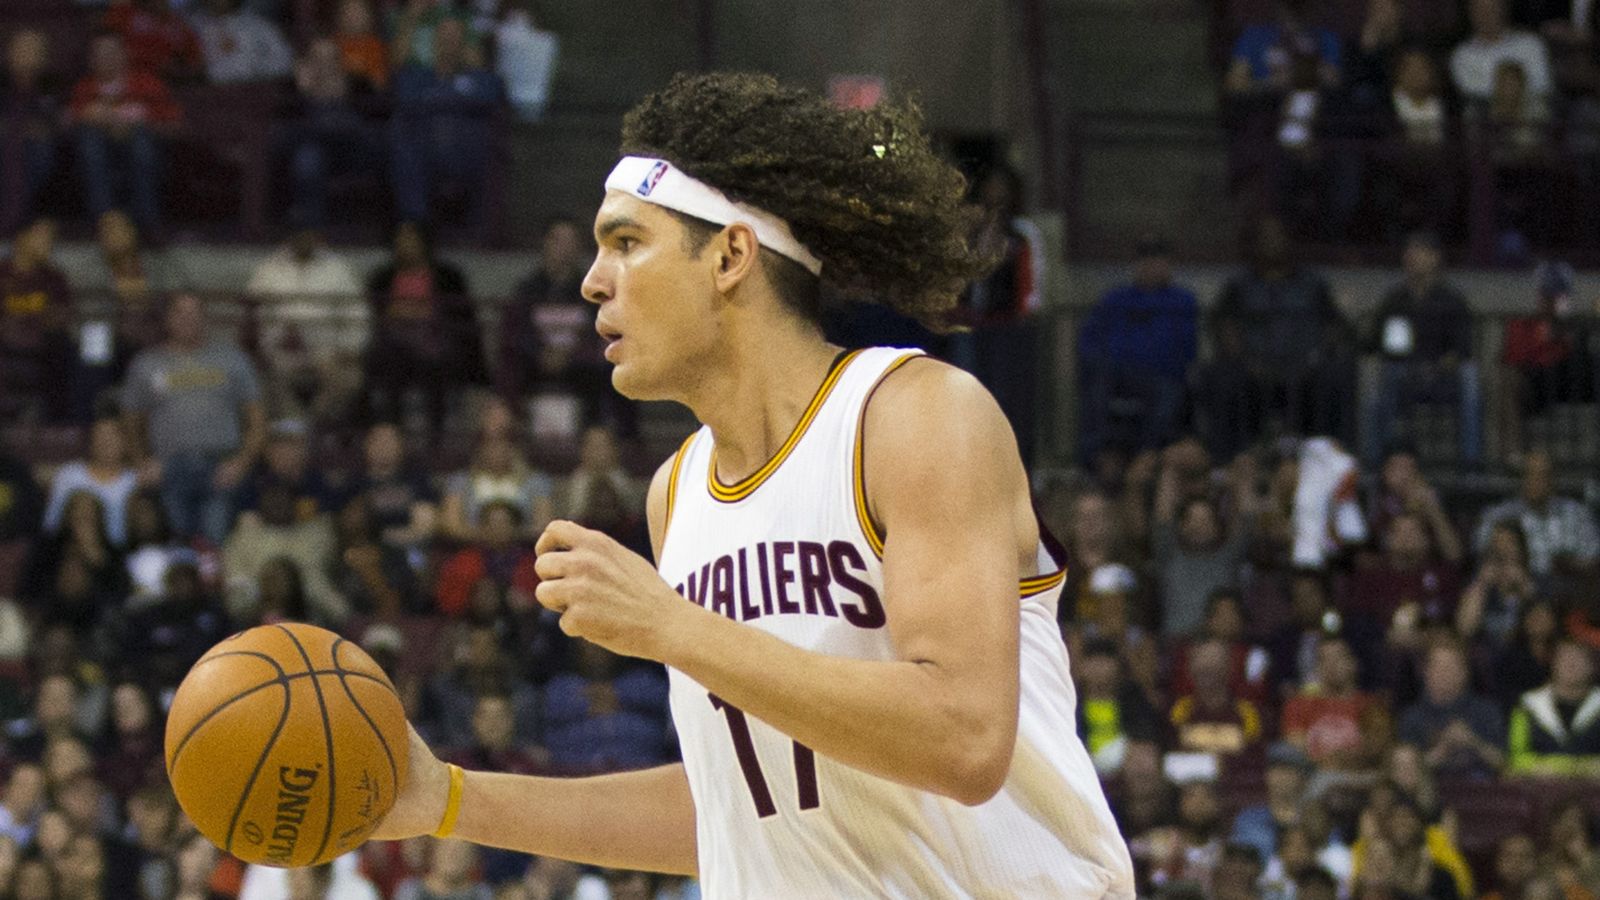 Can Anderson Varejao Still Make An Impact For Cleveland?